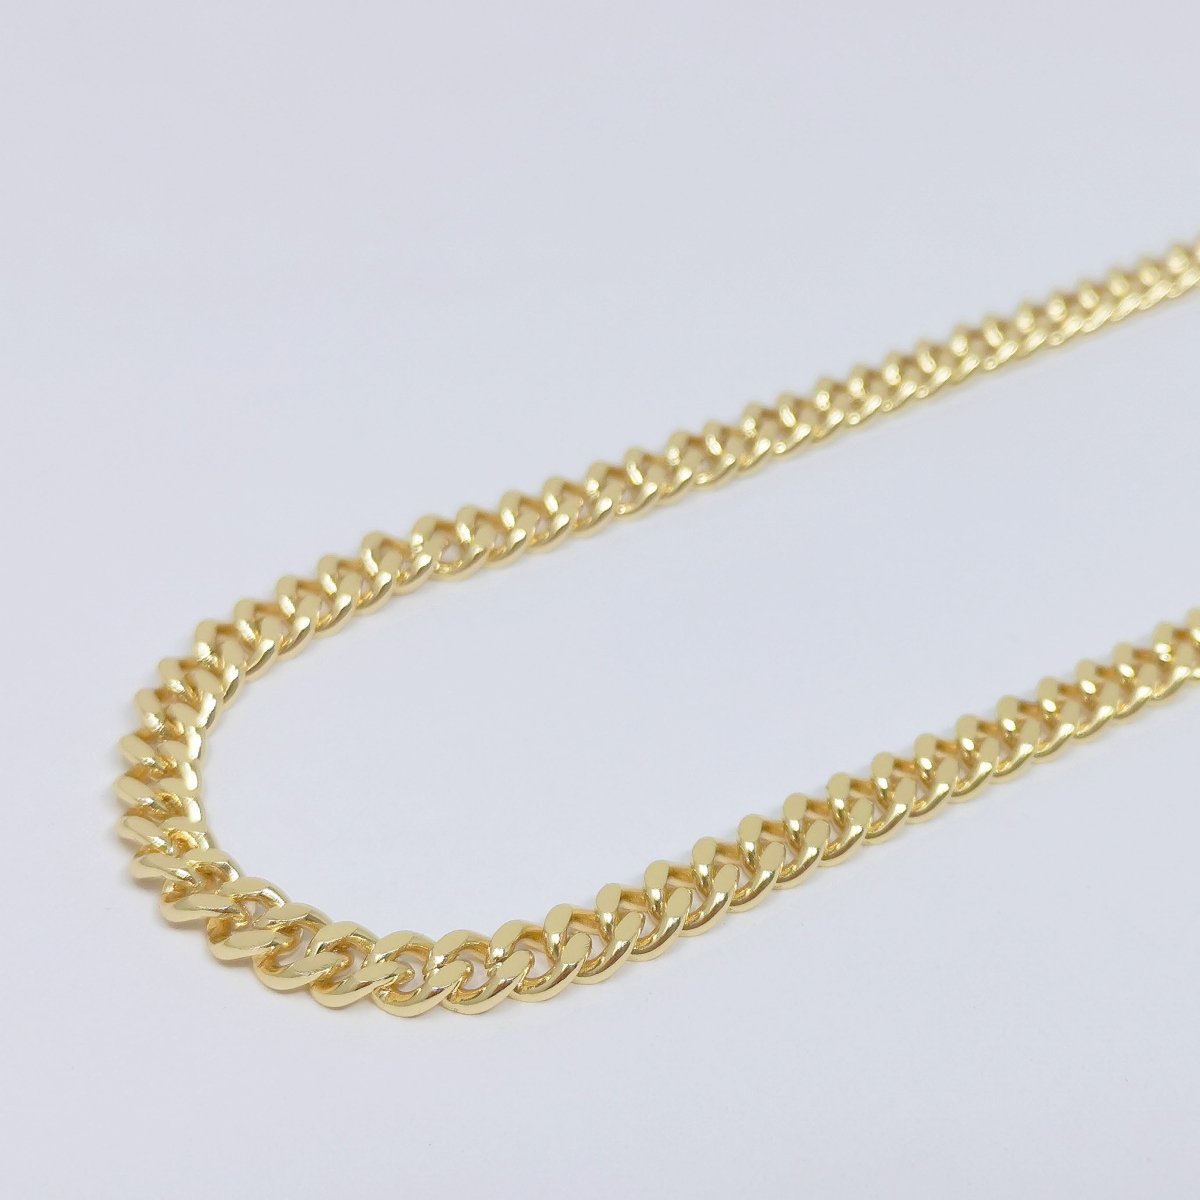 24K Shiny Gold Filled 7X6mm Cuban CURB Chain by Yard, Wholesale Bulk Roll Chain for DIY Craft, Thickness 2.1mm For Necklace Making | ROLL-416 Clearance Pricing - DLUXCA